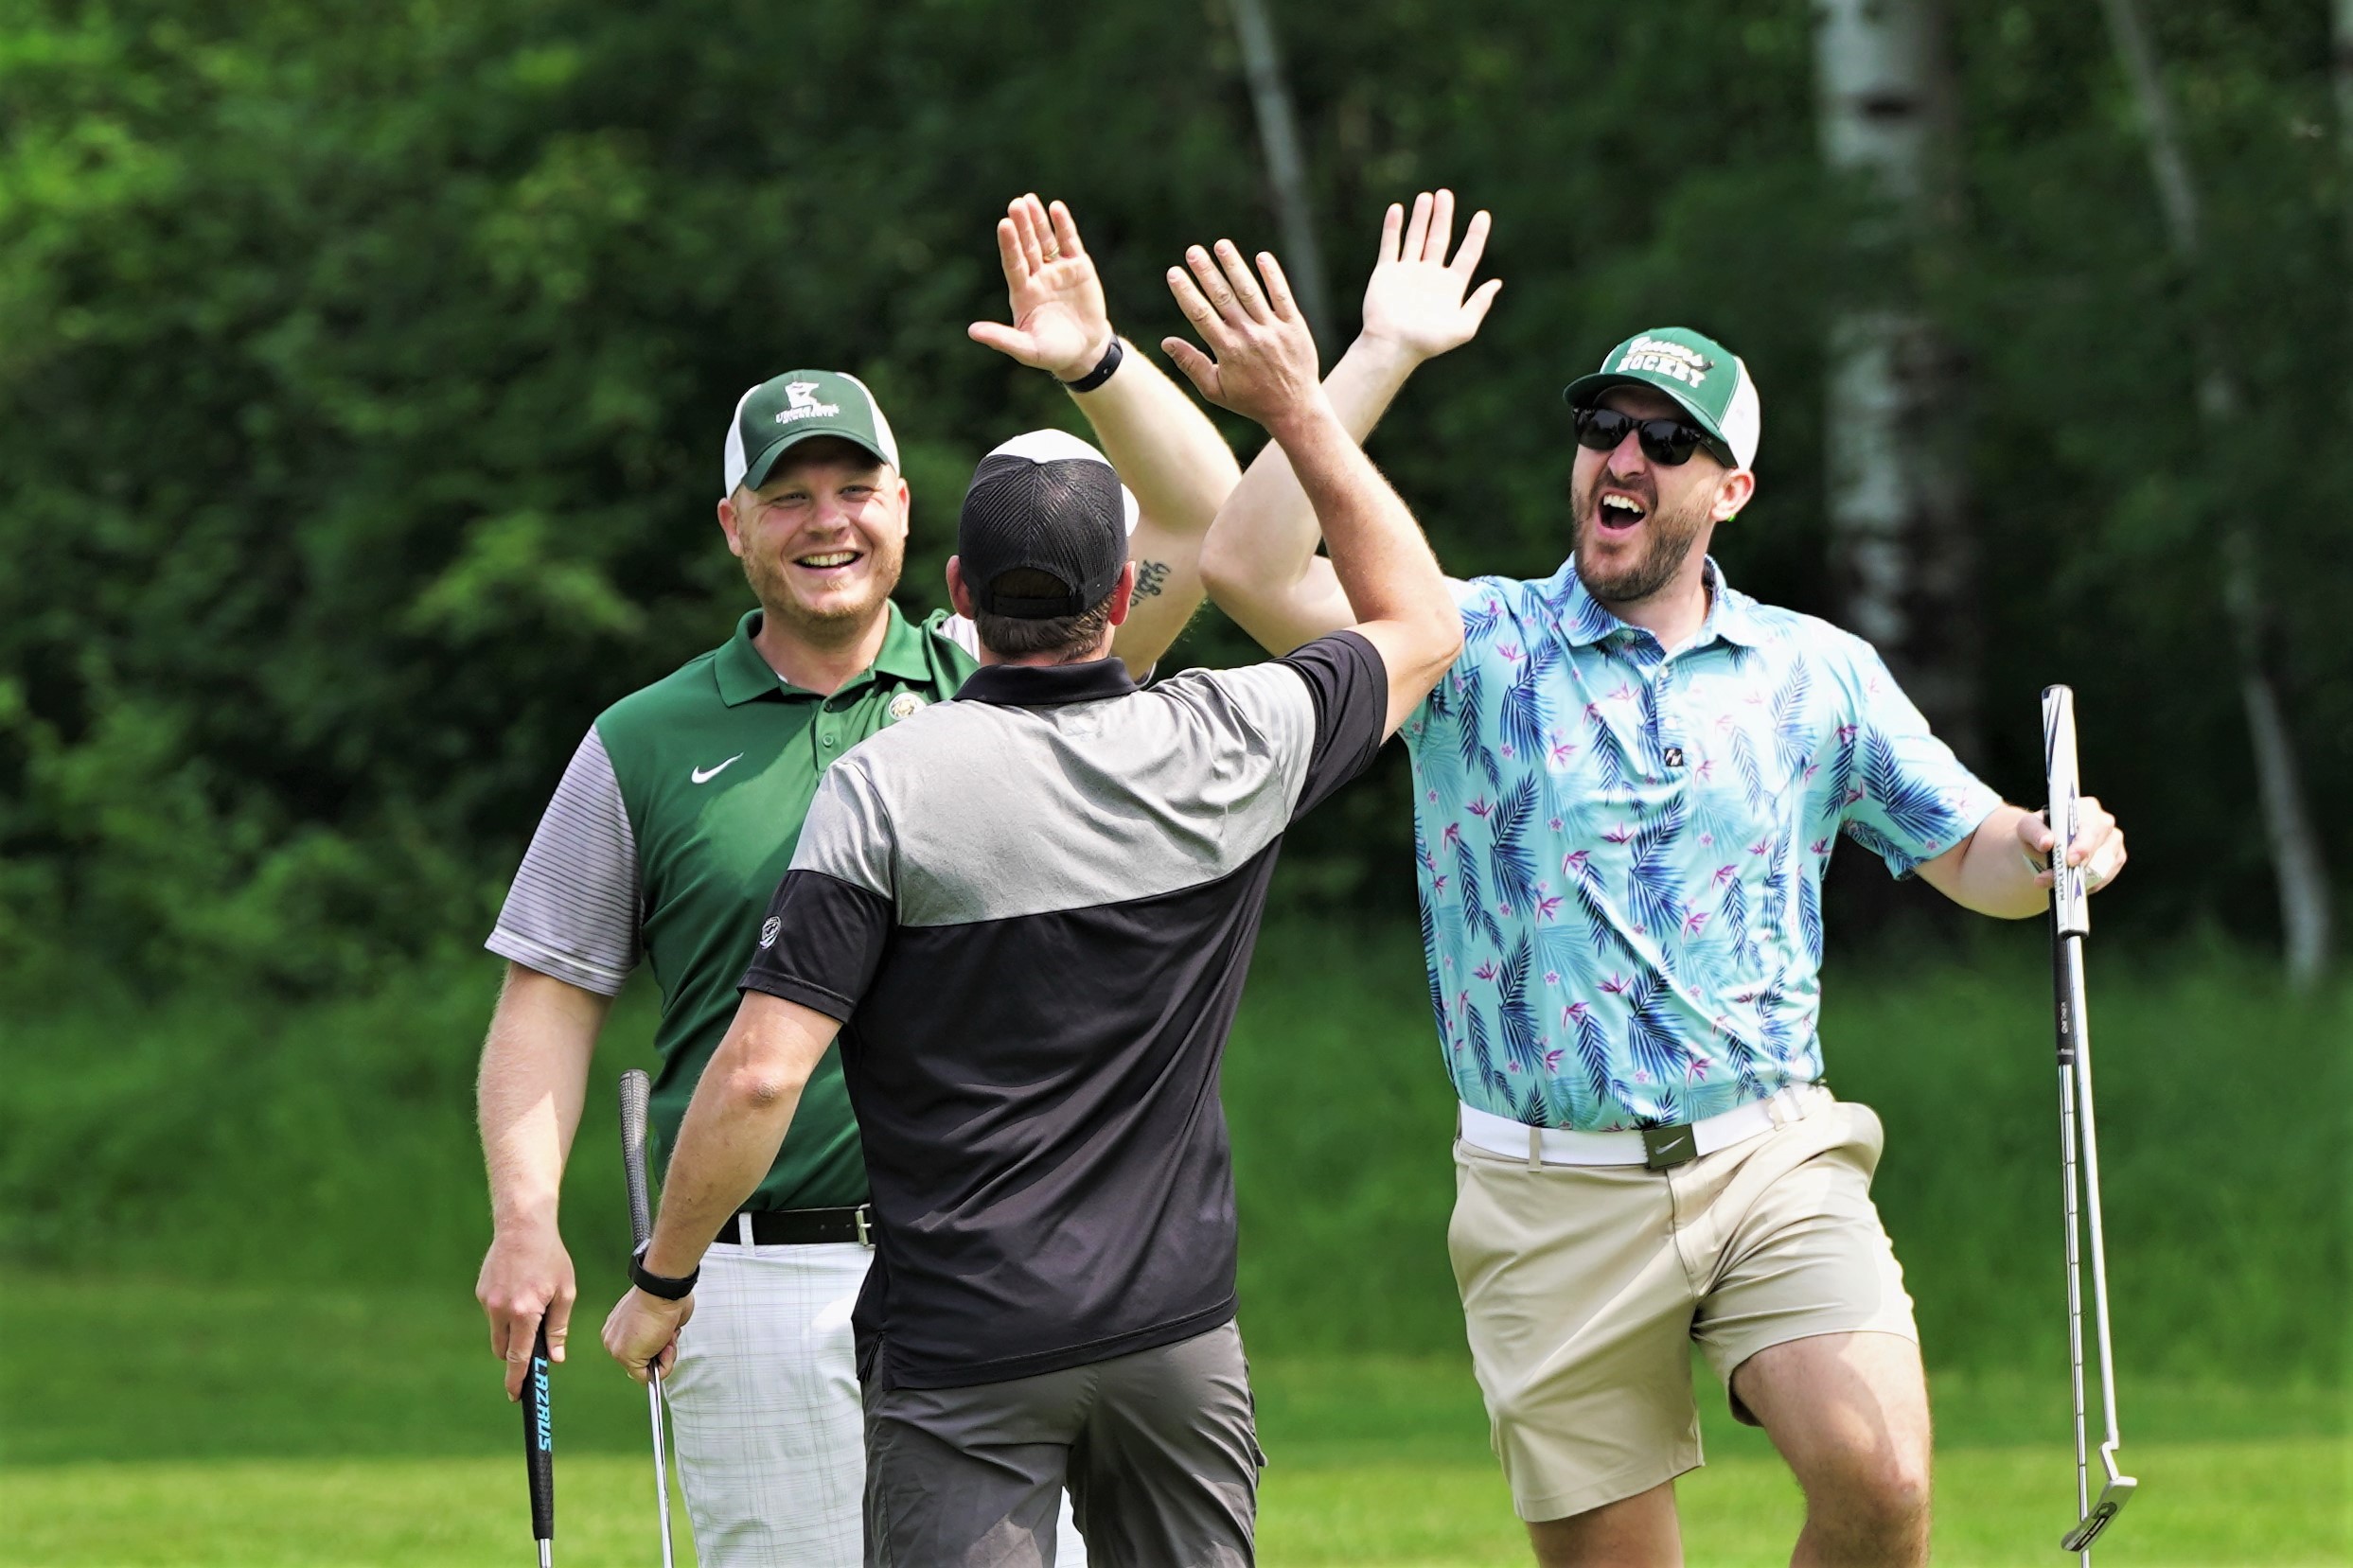 Jordan Anderson, left, Connor Laird, right, and Jake Sobieck celebrate after Anderson sunk a long putt on No. 15 during the 46th annual Gordy Skaar Memorial Golf Tournament on Friday, June 16, 2023, at the Bemidji Town and Country Club. (Micah Friez / Bemidji State)